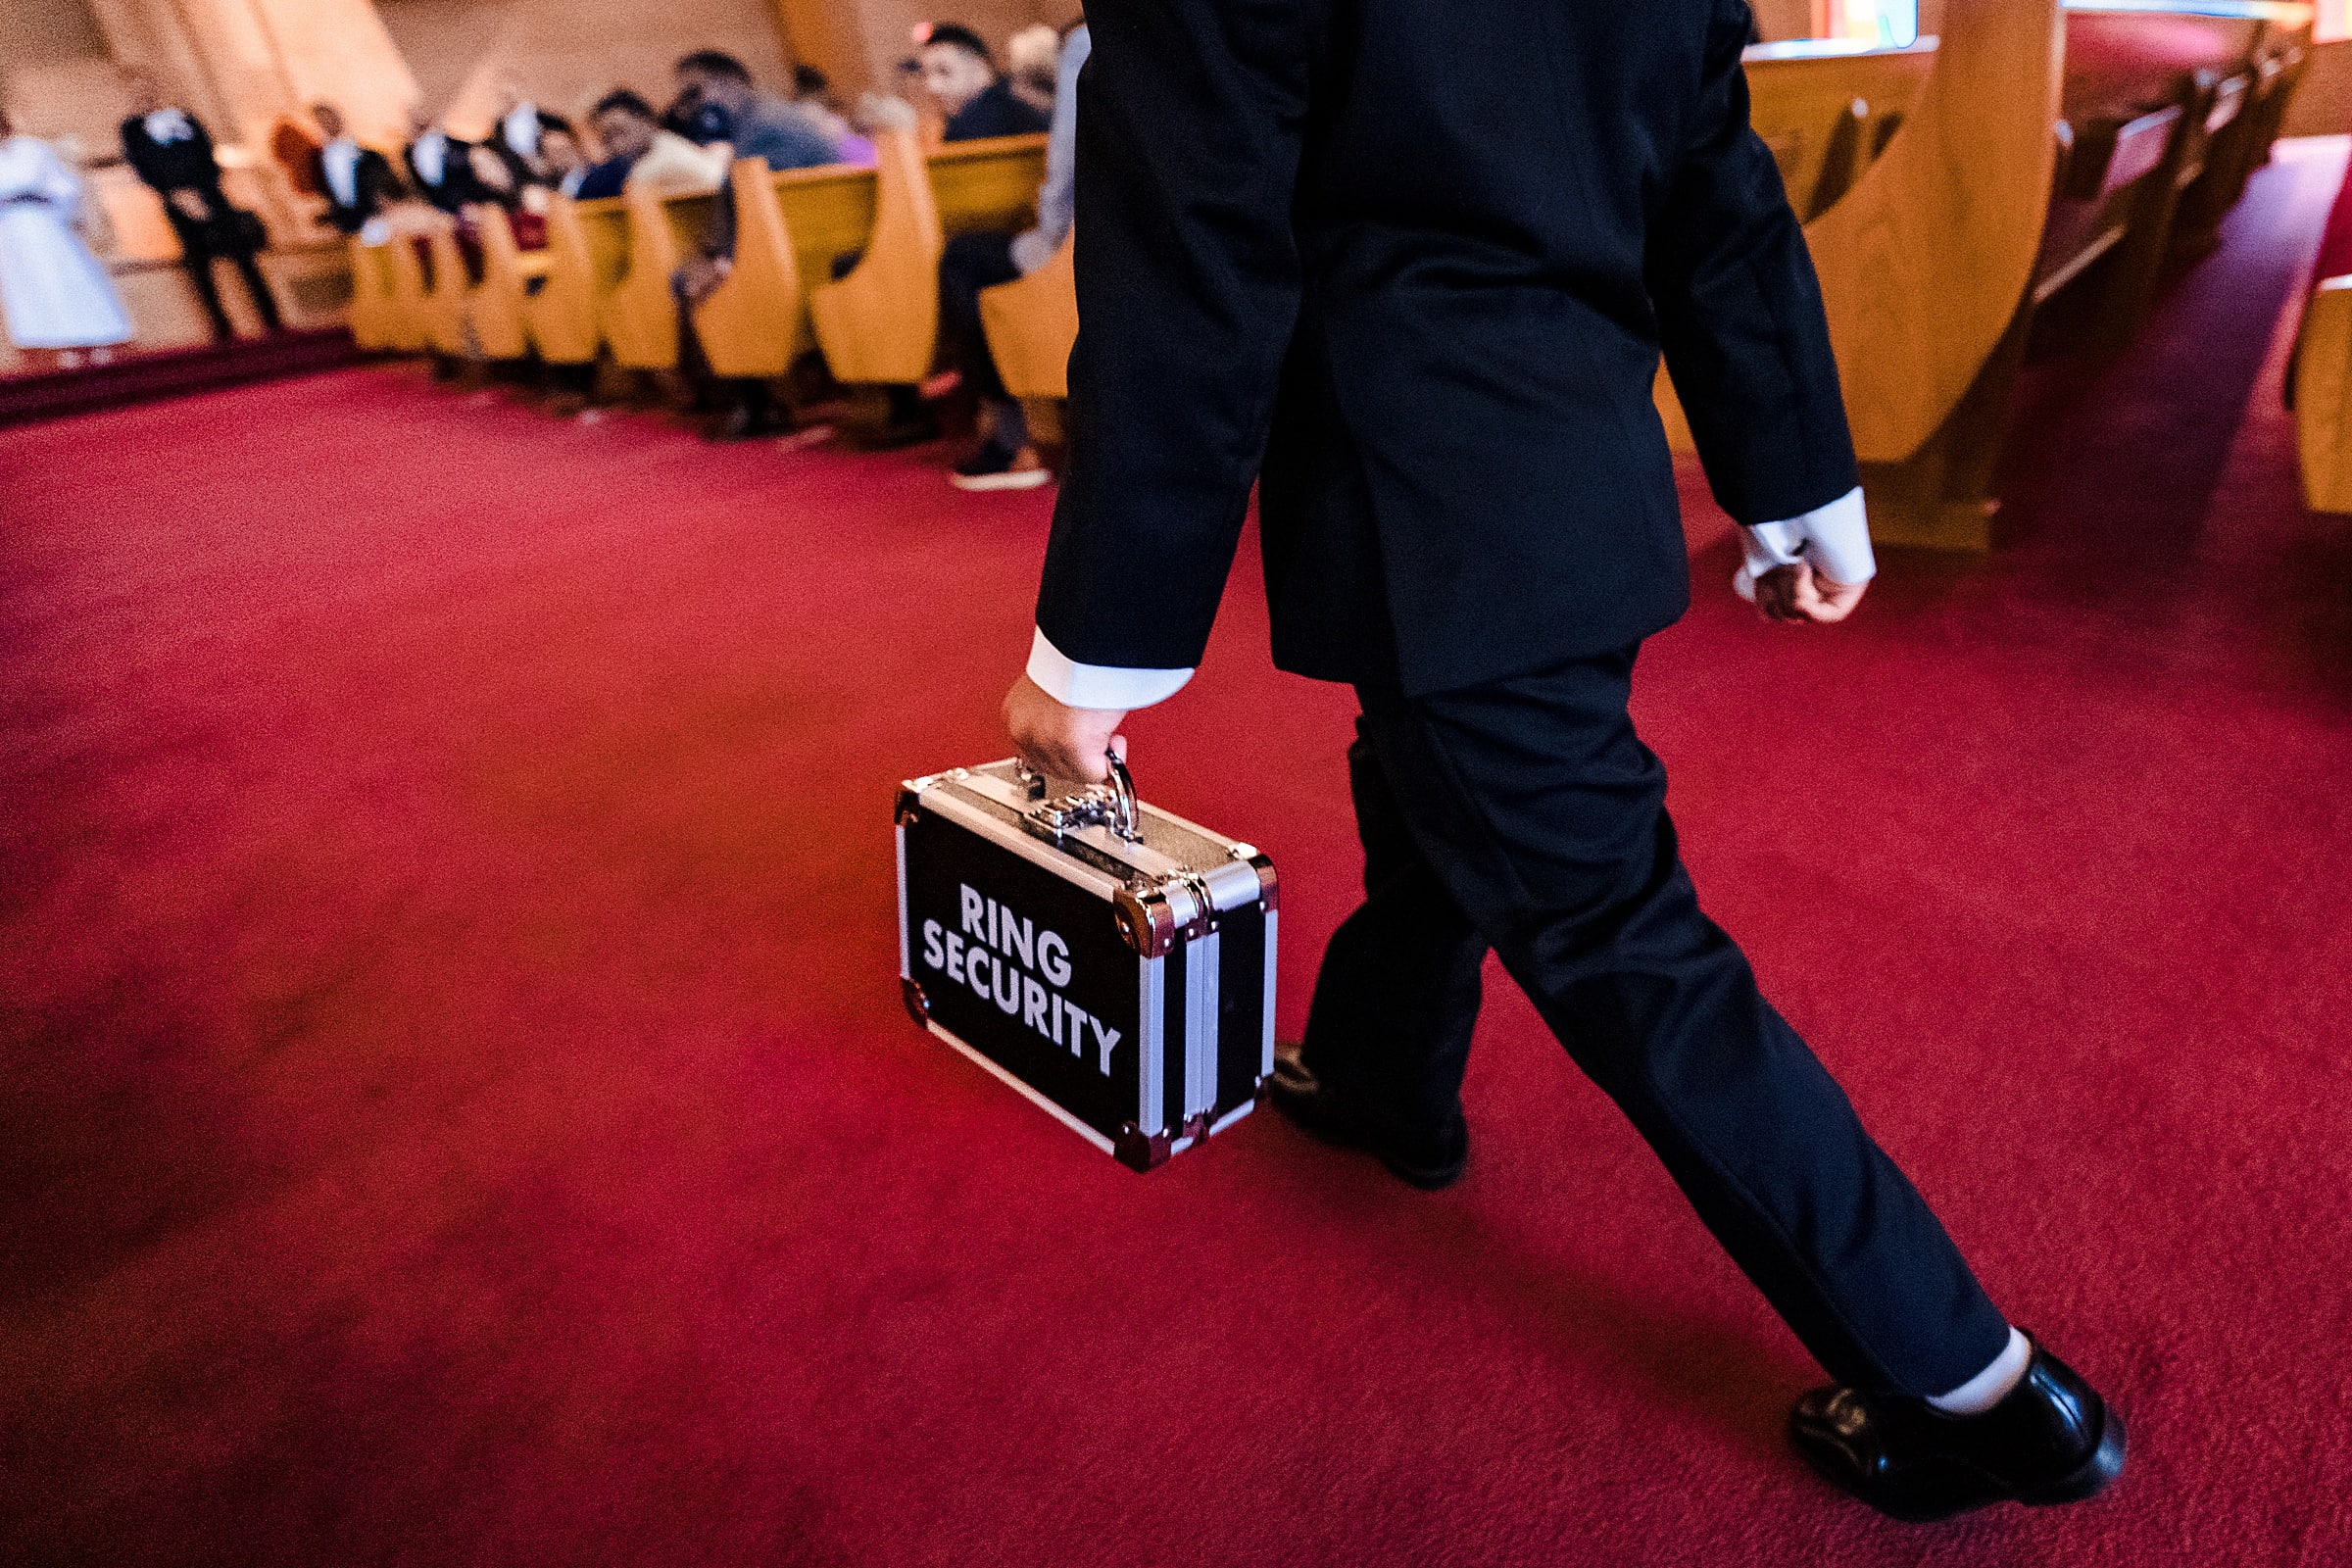 Ring bearer with a security case | photos by Kivus & Camera